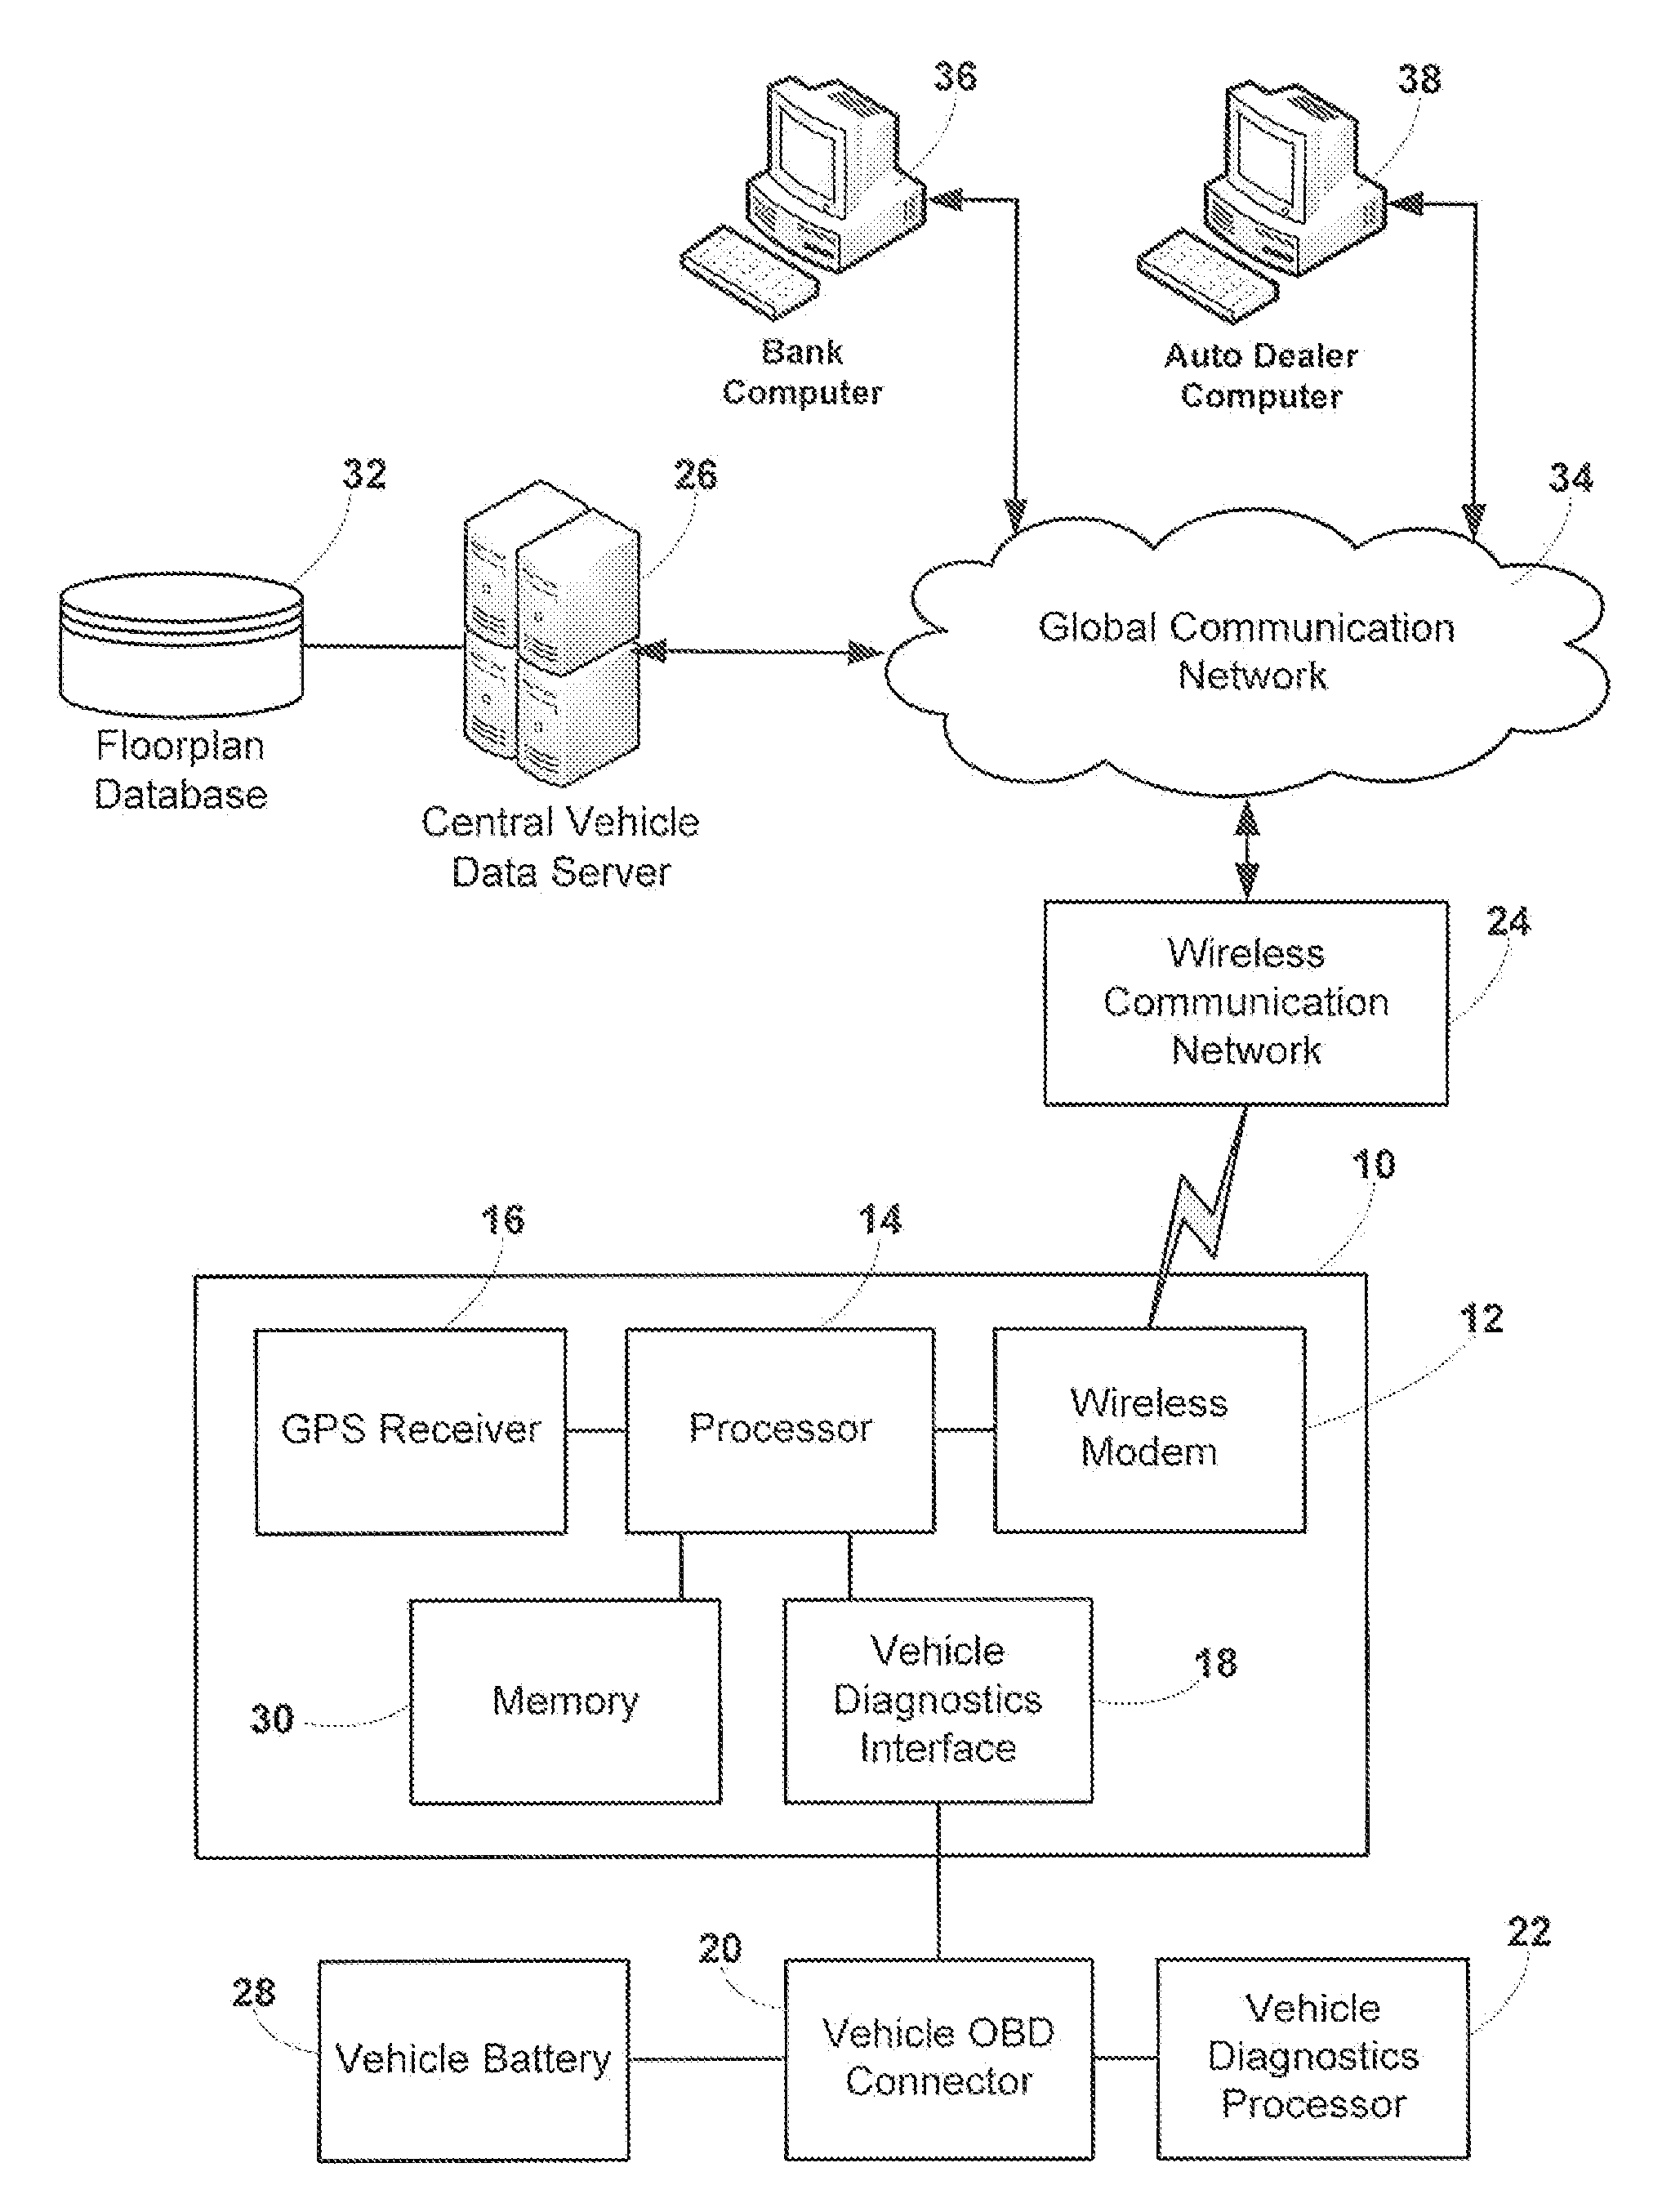 System for processing data acquired from vehicle diagnostic interface for vehicle inventory monitoring